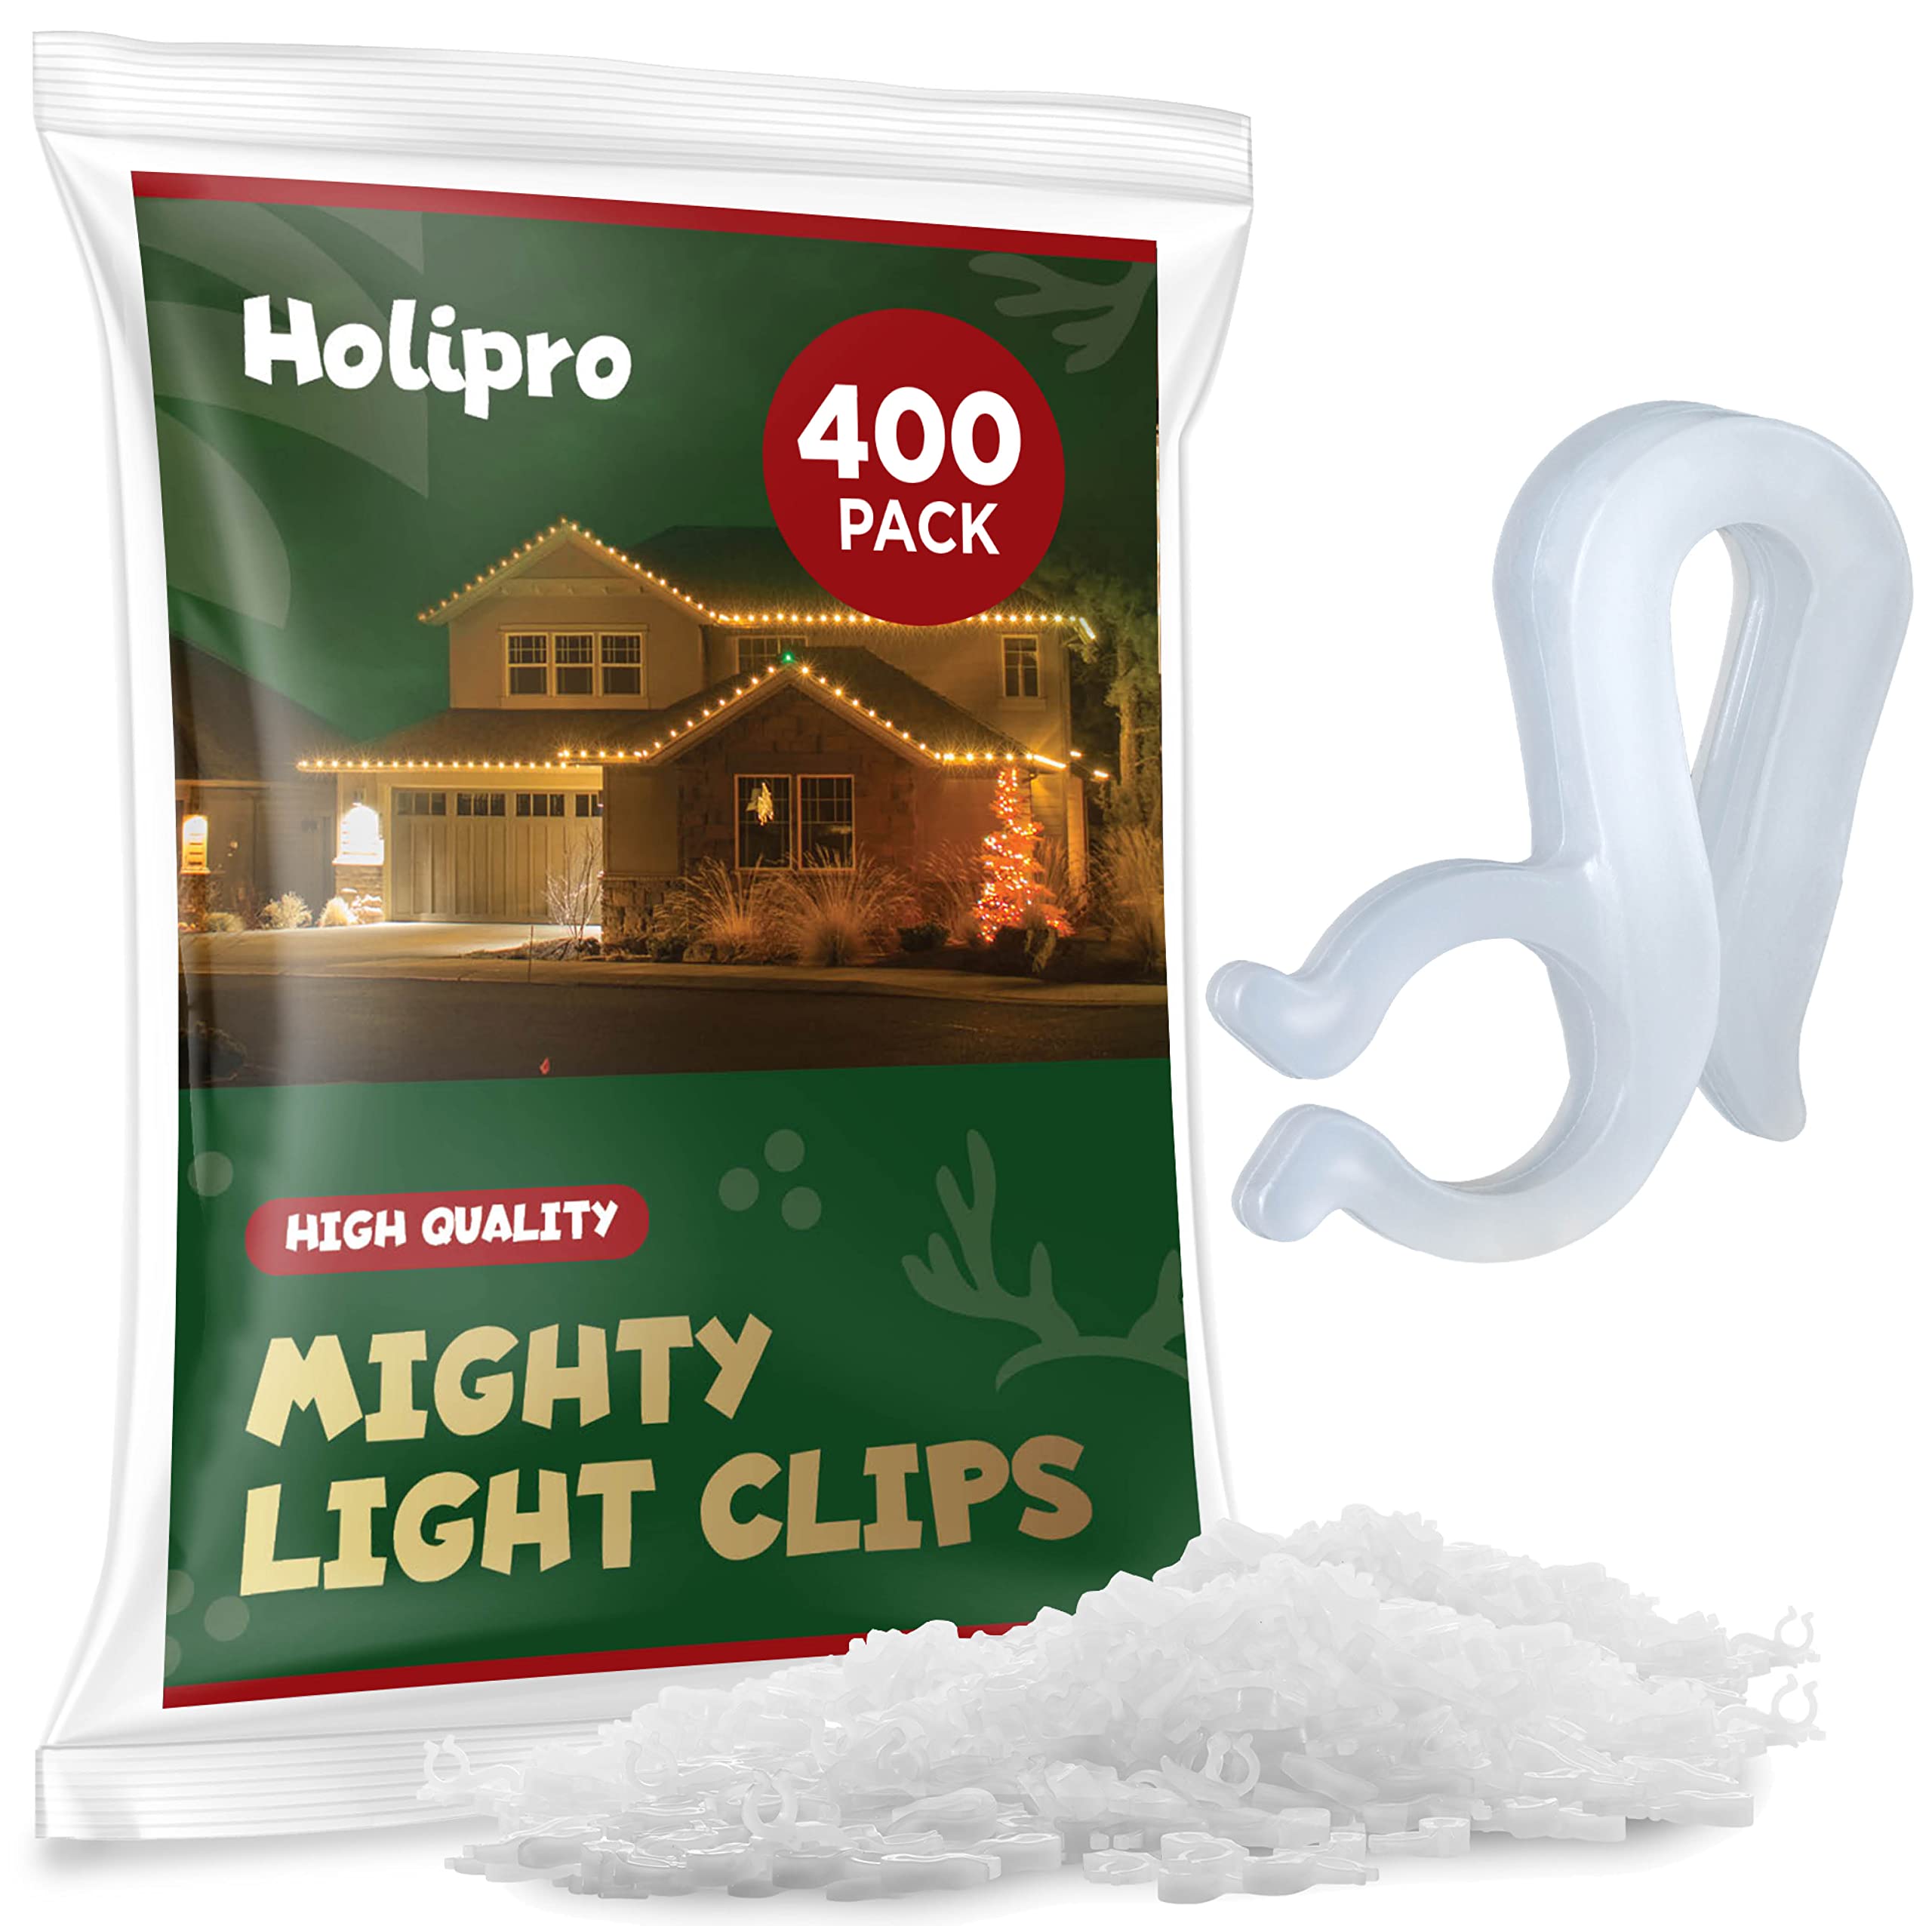 Christmas Light Clips - [Set of 400] Mini Light Clips For Christmas Lights - Light Clips For Gutters - Light Clips For Shingles - Gutter Clips For Hanging Outdoor Lights - USA Made - No Tools Required  - Very Good